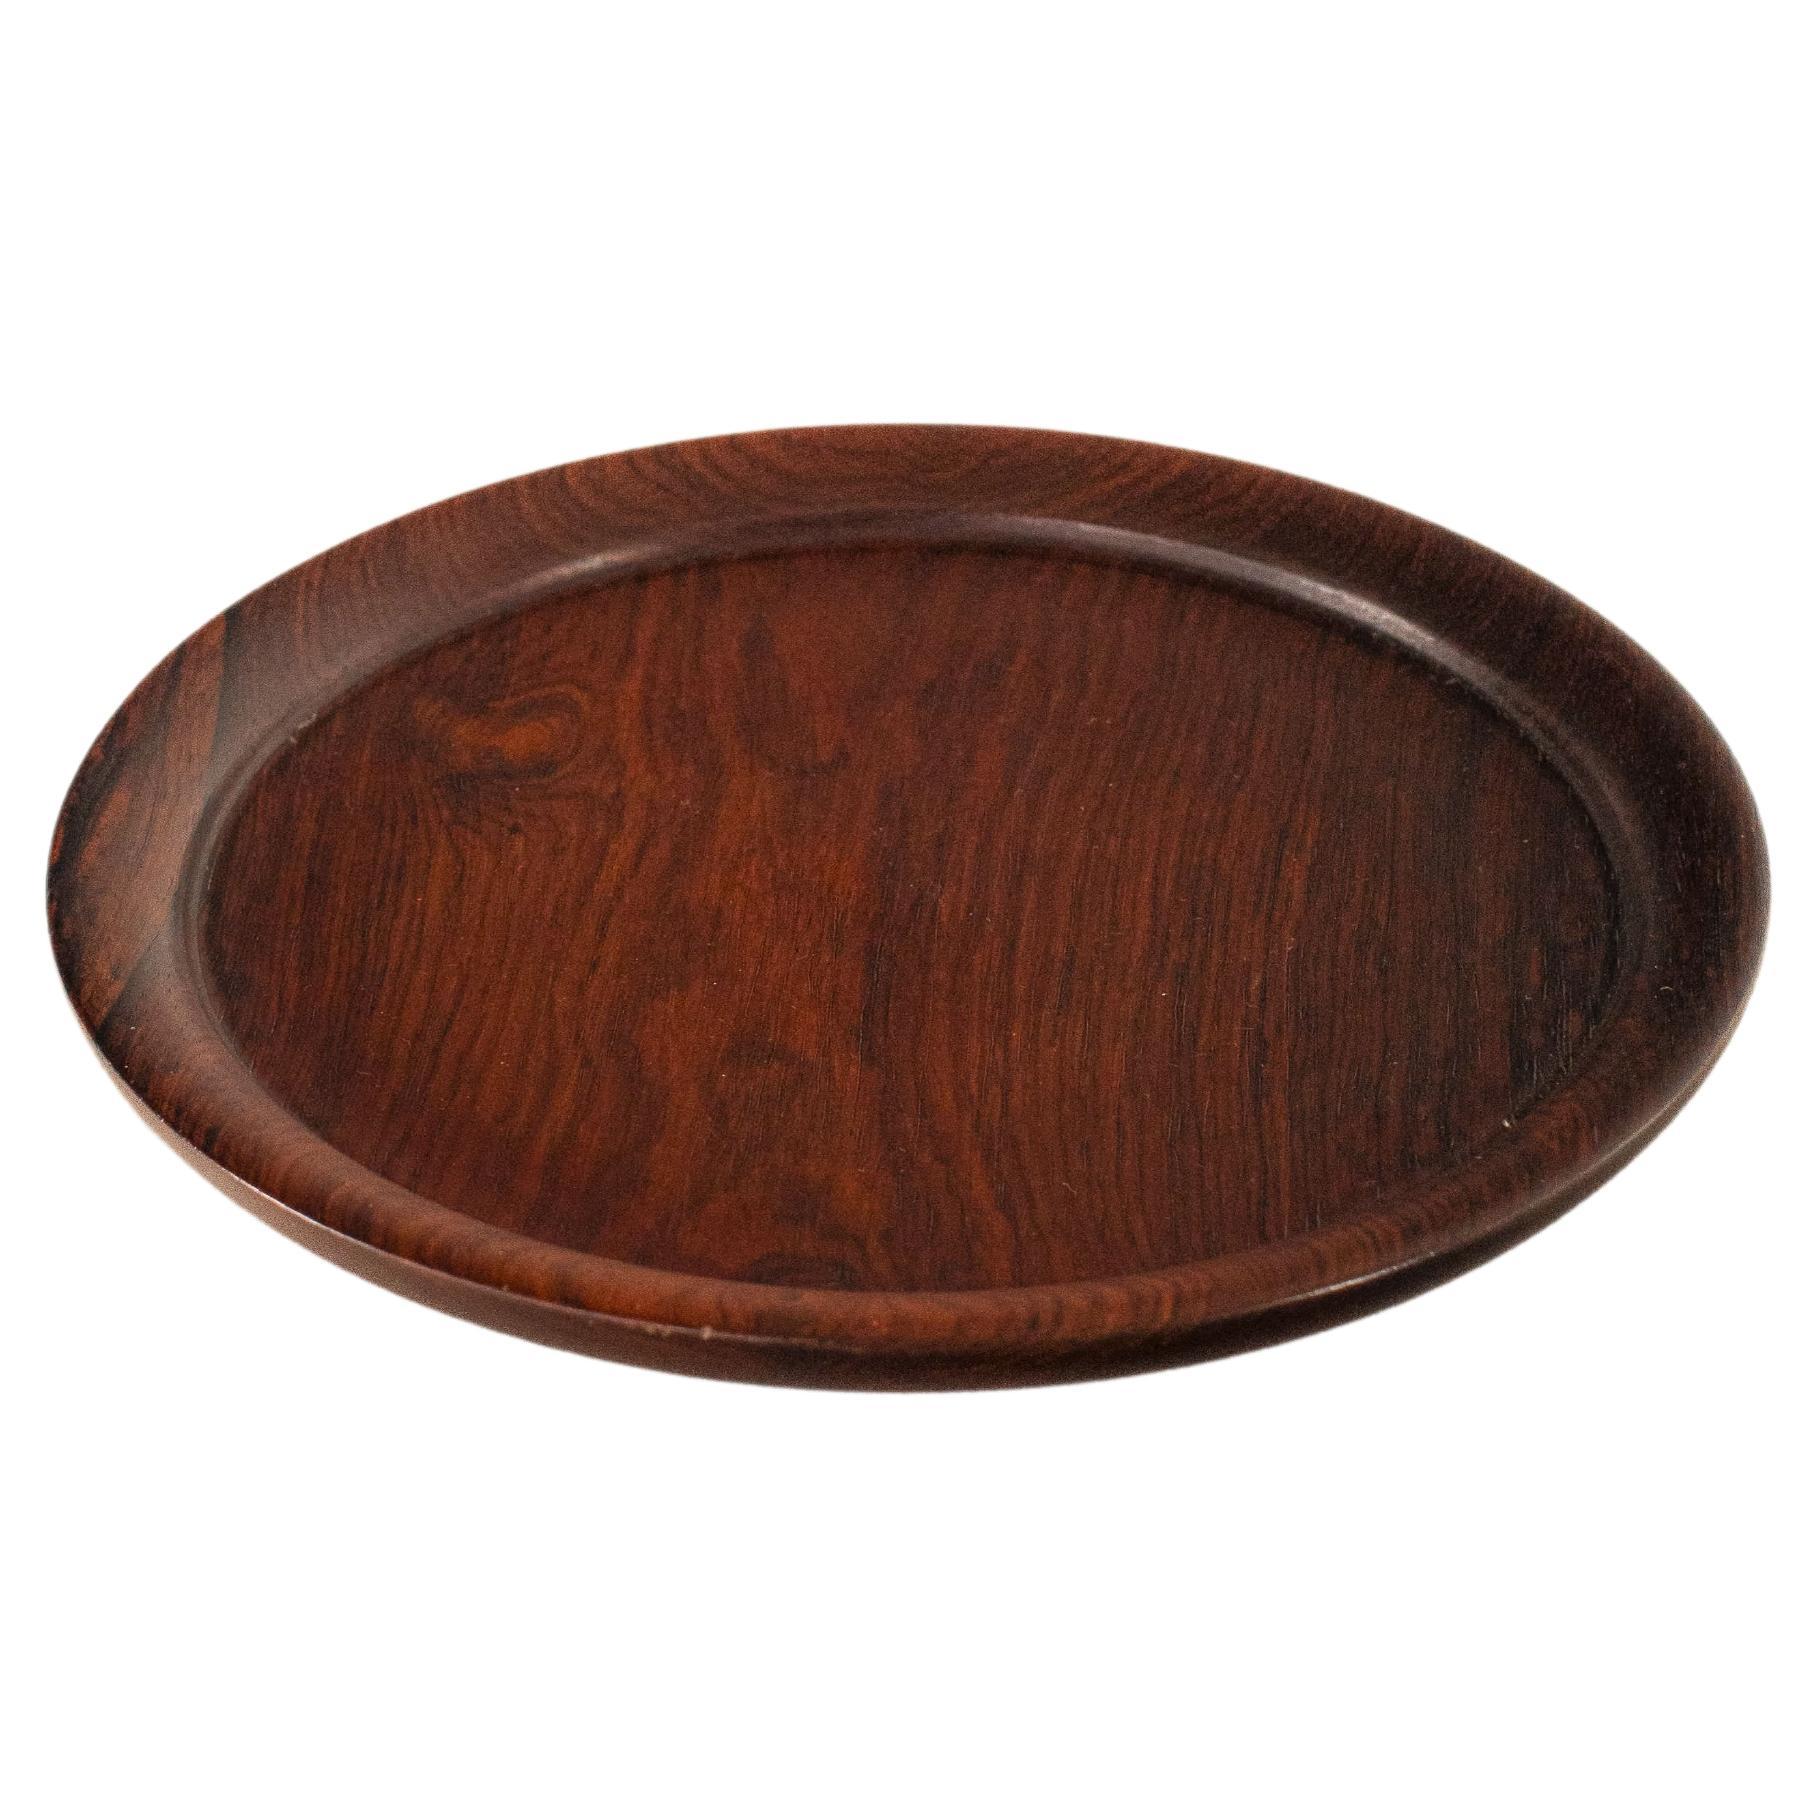 Brazilian Midcentury Serving Round Plate in Rosewood, c. 1970